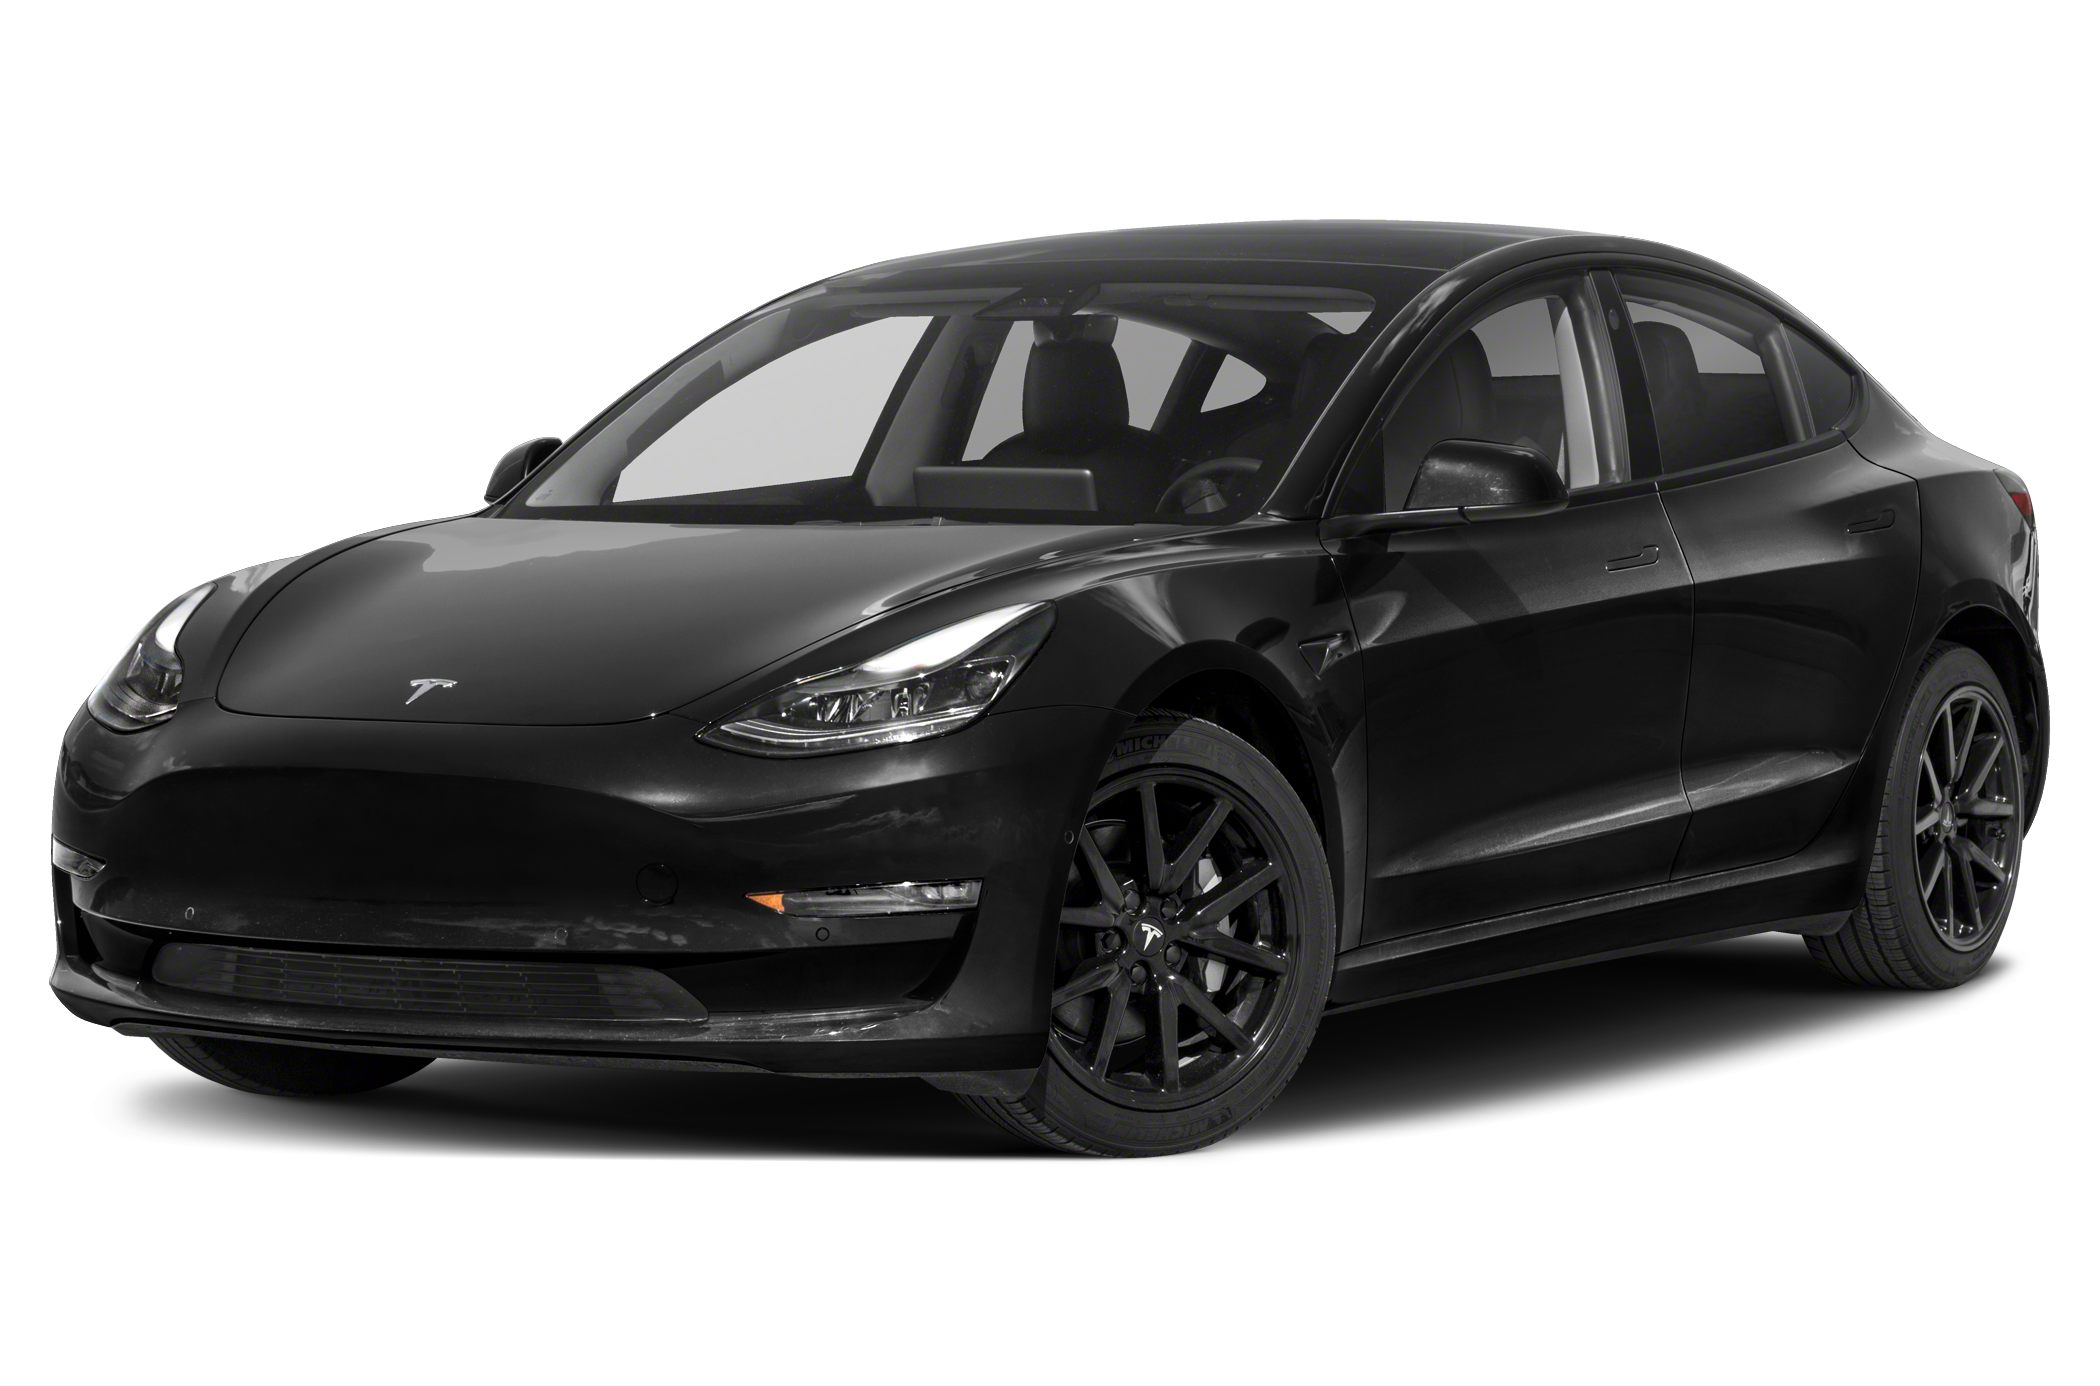 Select Tesla Model 3 variants to lose $7,500 tax credit by 2024